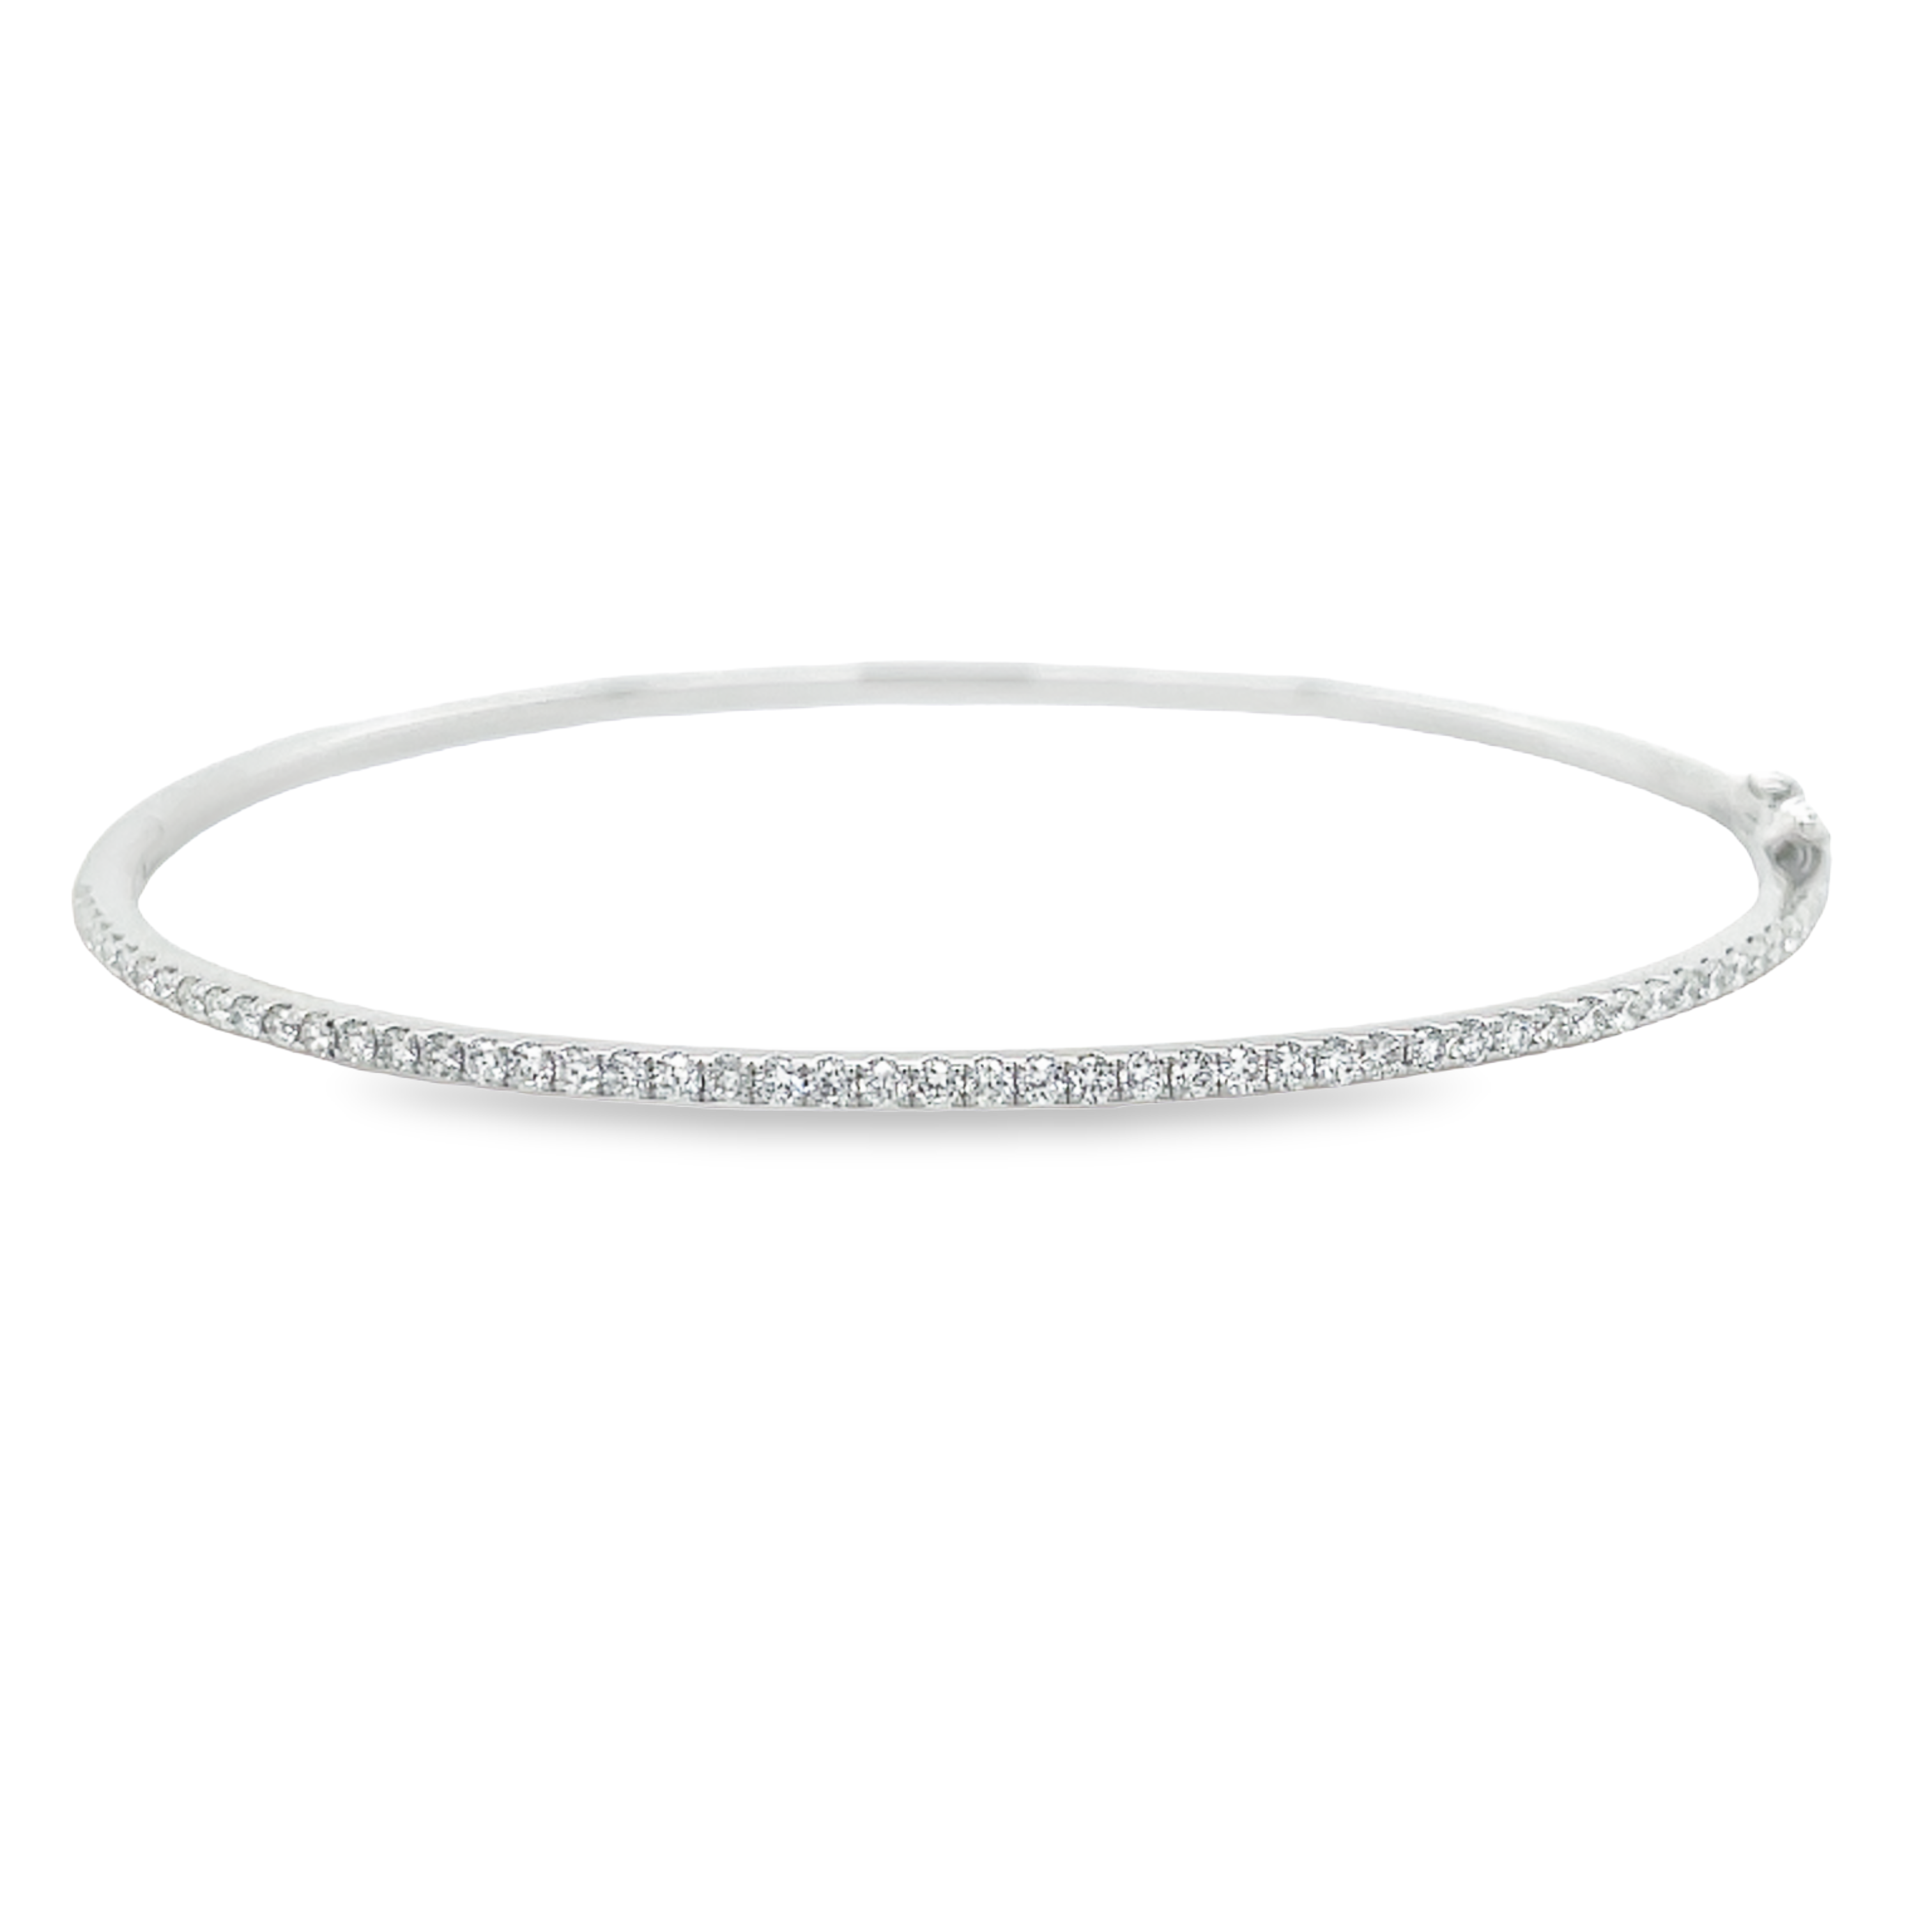 This luxurious dainty bangle bracelet crafted in 18K white gold is set with 0.48 carats of round diamonds. It is the perfect accessory to add a subtle sparkle to any ensemble or stack multiple for a bolder look.  F/G color  Hinge system  Secure fig 8  Prong setting 